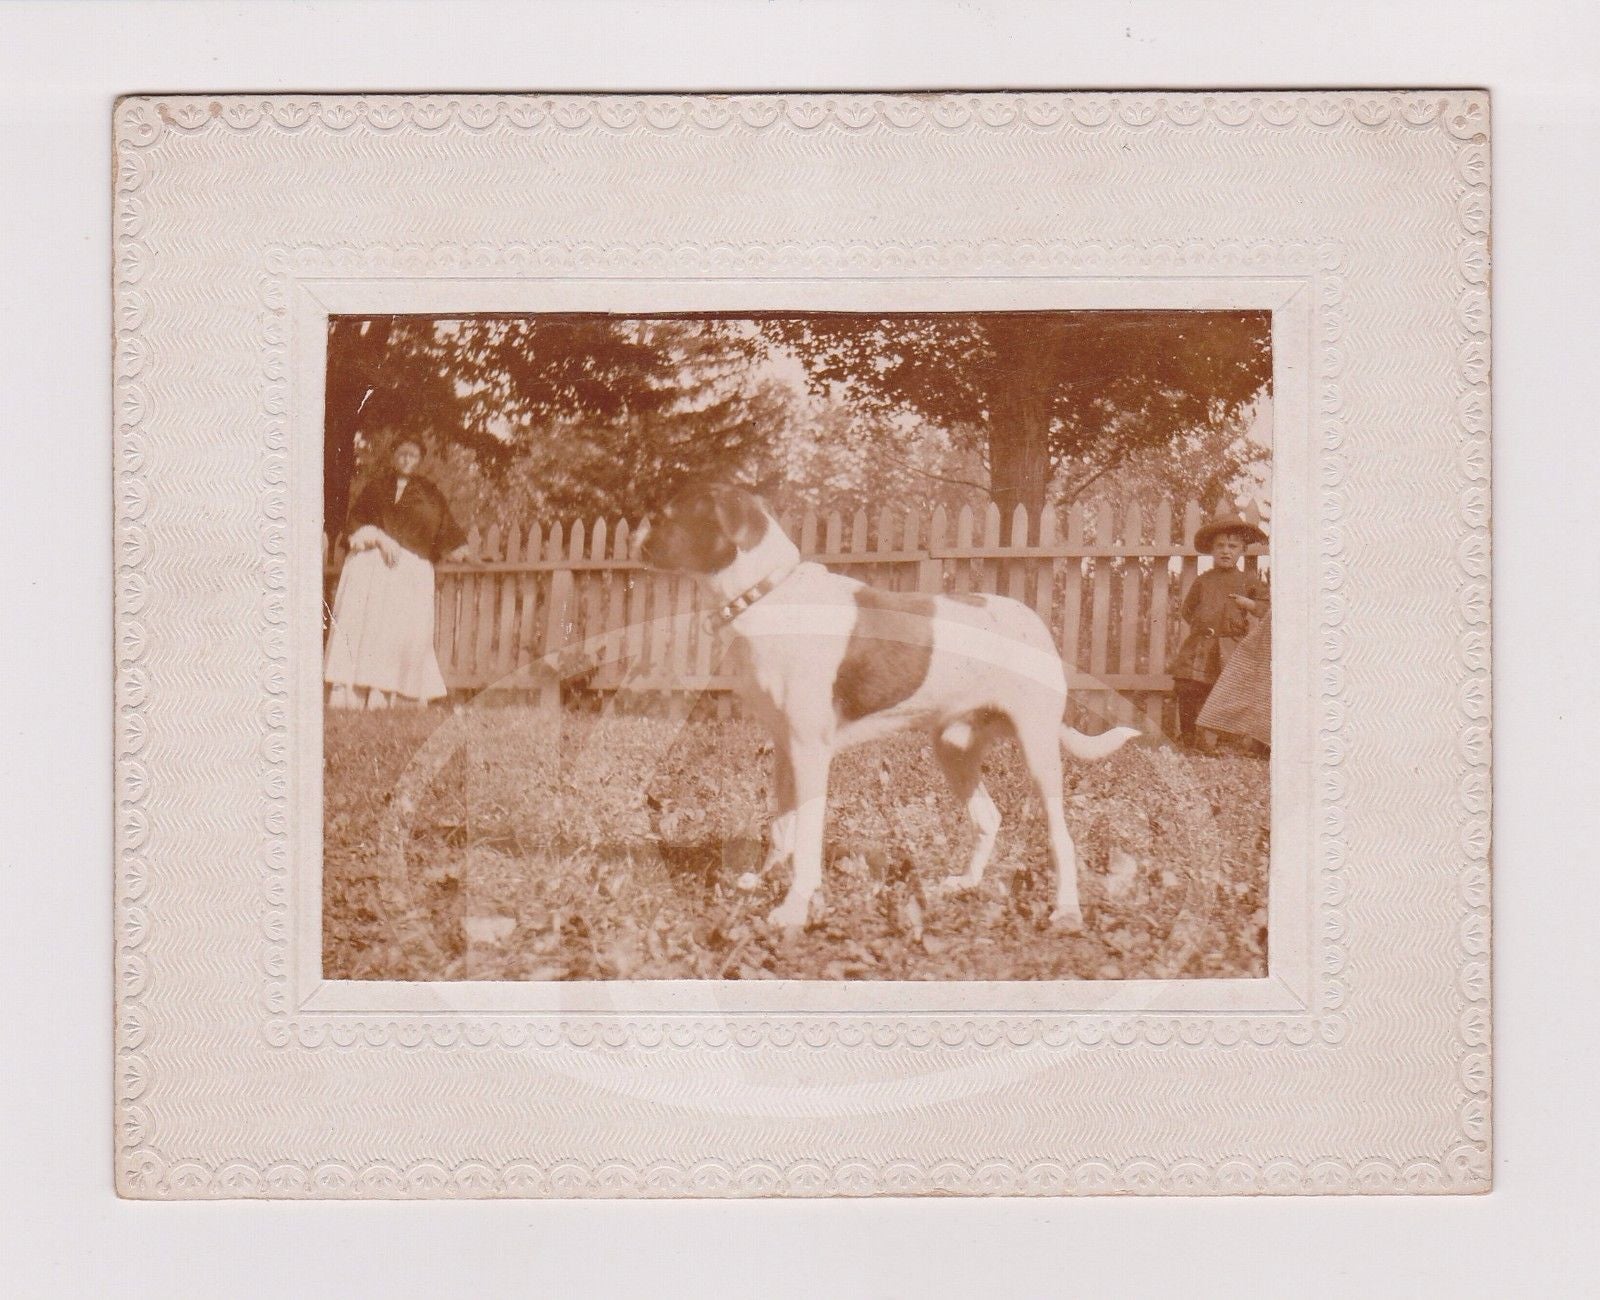 AMERICAN BULL DOG PUPPY IDed MASTER NED UTZ OUT IN YARD ANTIQUE PHOTO ON BOARD - K-townConsignments